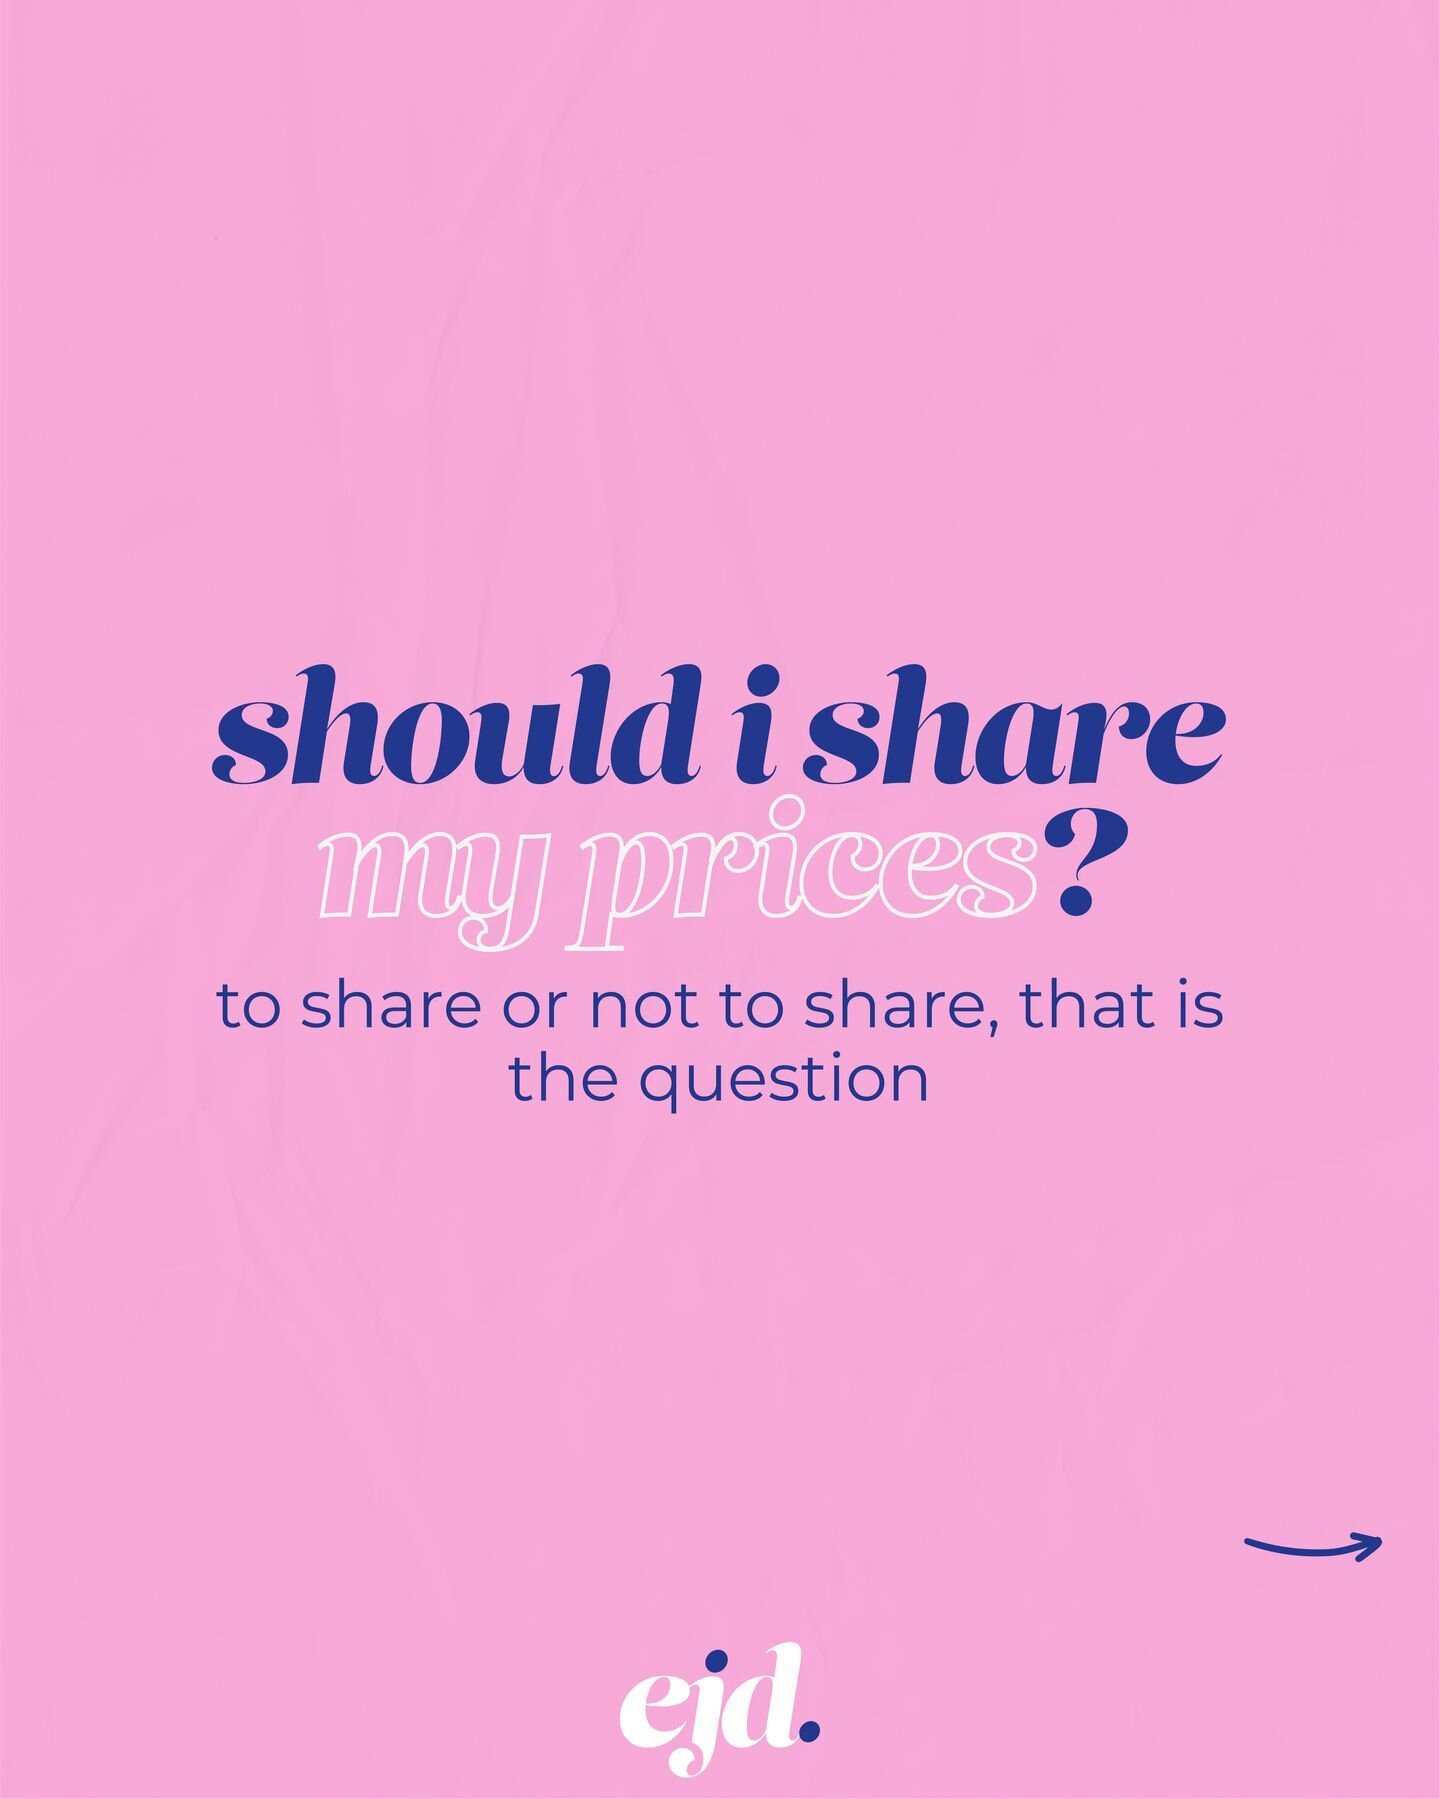 the age-old debate - to share or not to share?

here are some of my thoughts on price transparency 🤔

now I'm not saying every exact price has to be shared, quoting projects individually is part of the job of a graphic designer

but a rough guidelin